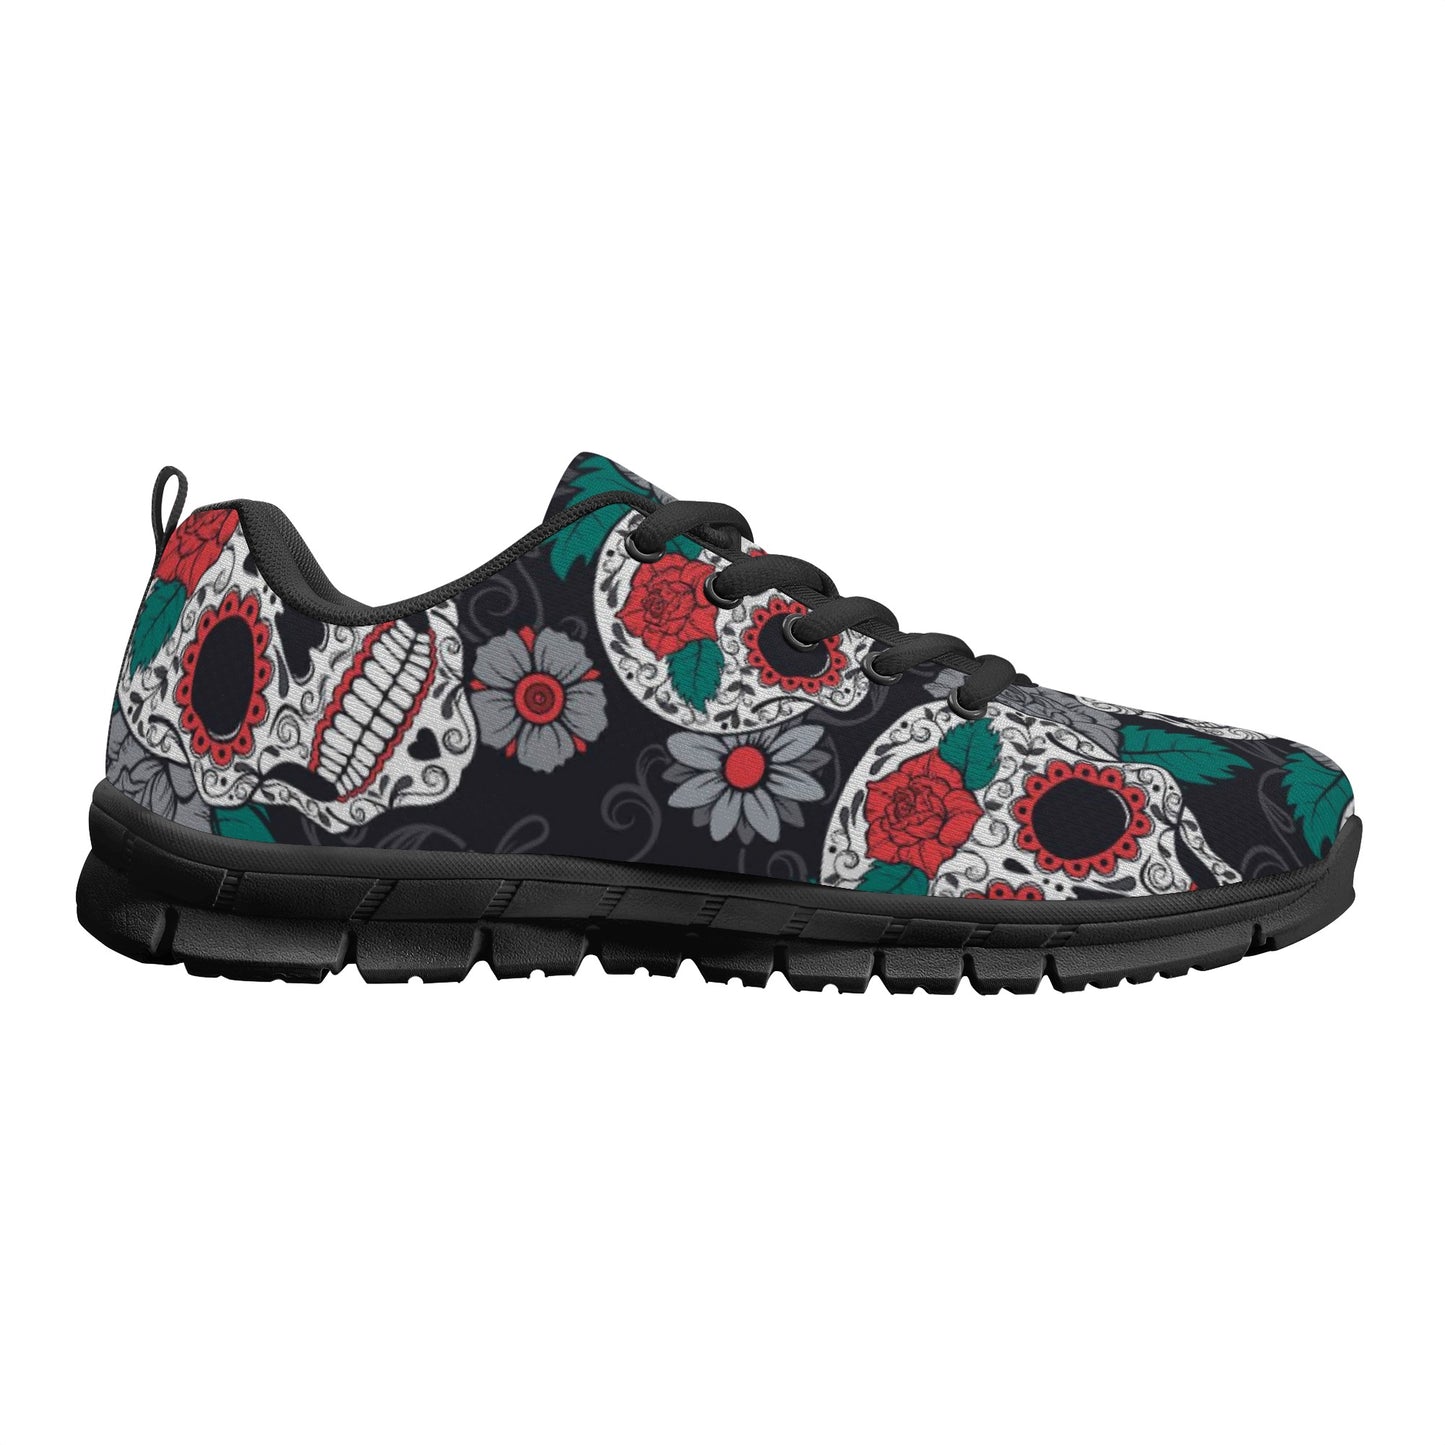 Day of the dead candy skull gothic Women's Running Shoes